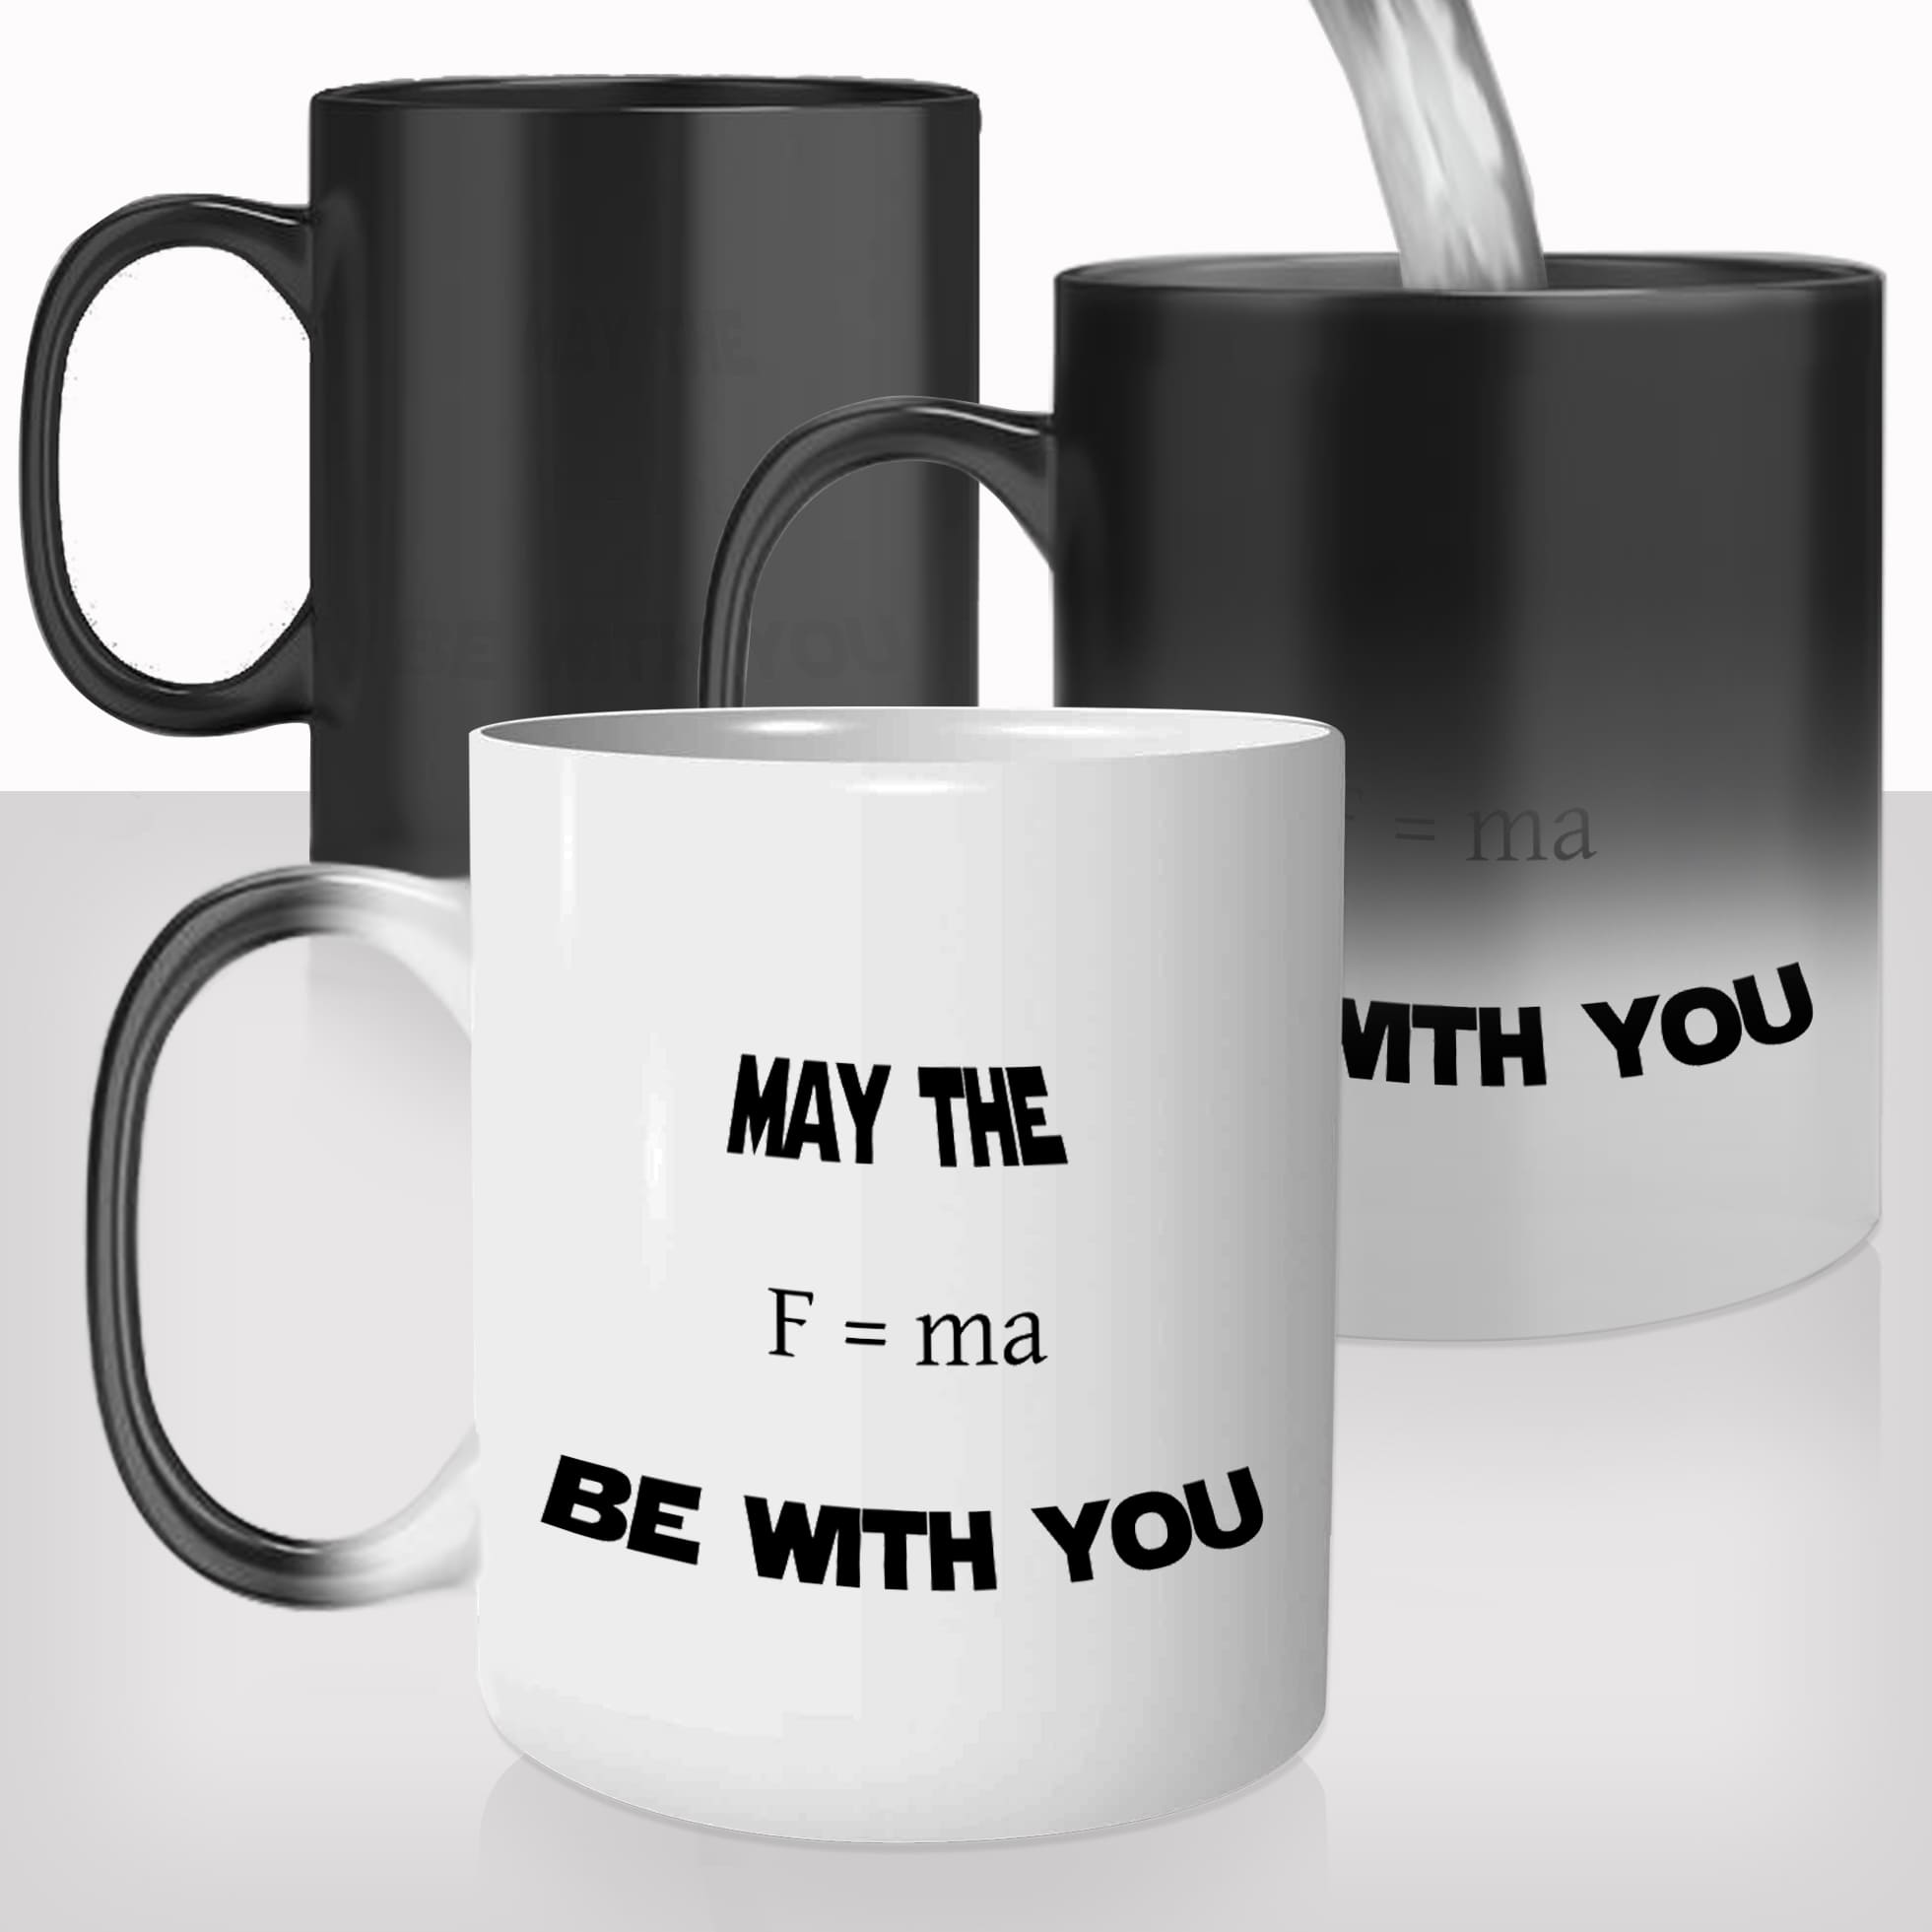 mug-magique-thermoréactif-thermo-chauffant-personnalisé-may-the-force-be-with-you-star-wars-geek-reference-idée-cadeau-original